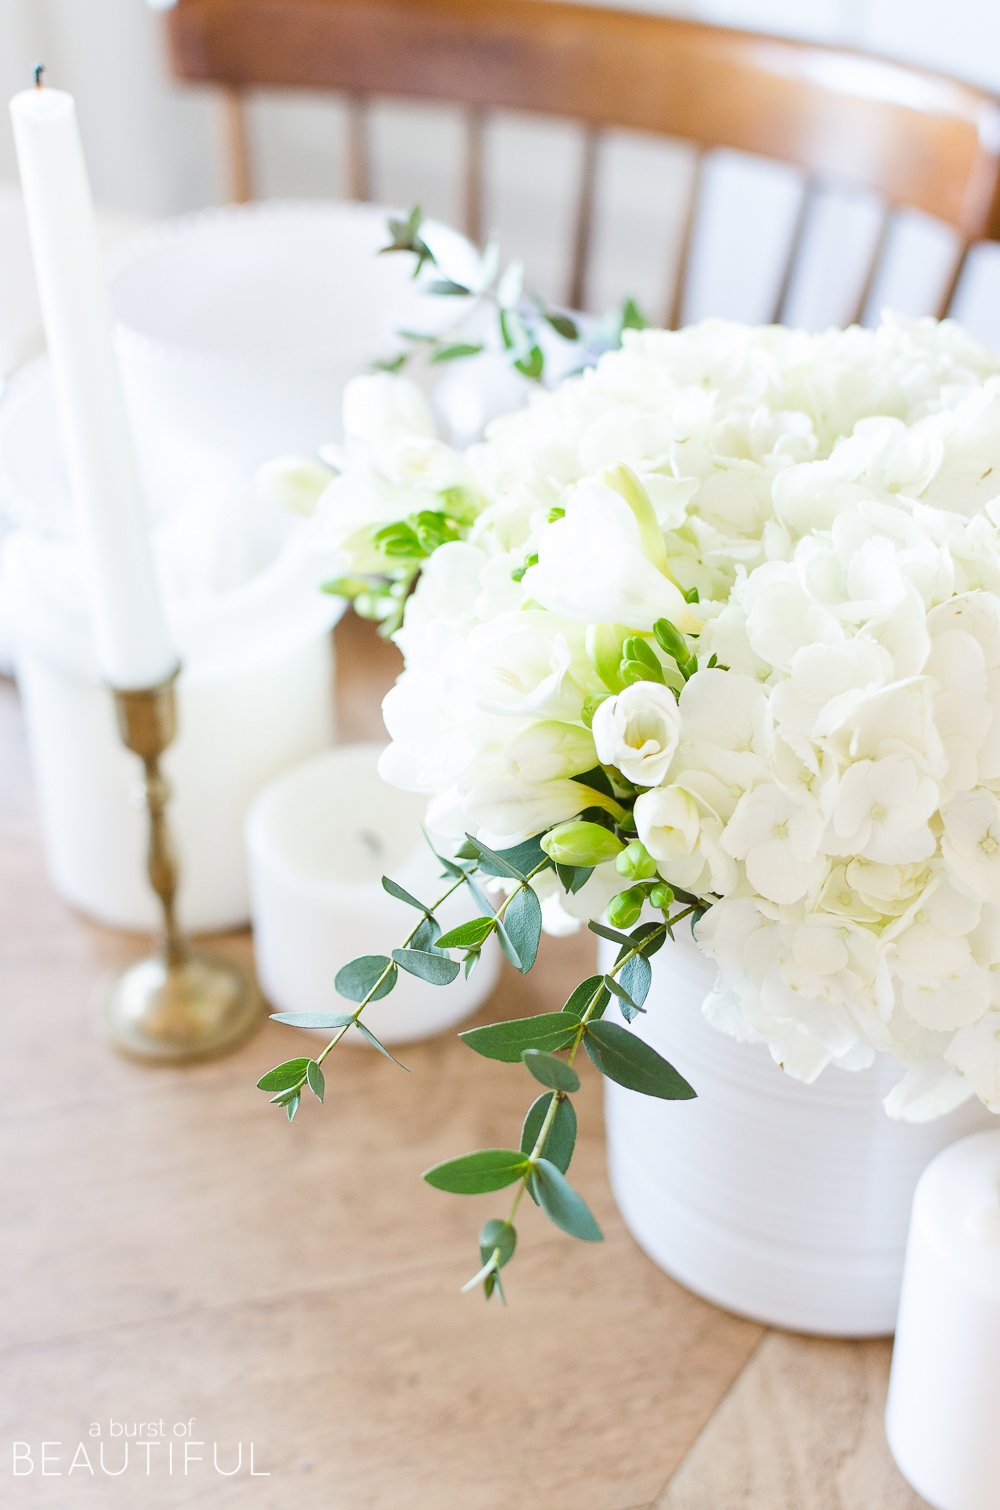 A simple spring tablescape set in a classic blue and white color palette with a centerpiece of white hydrangeas and crocuses leads to easy spring entertaining.